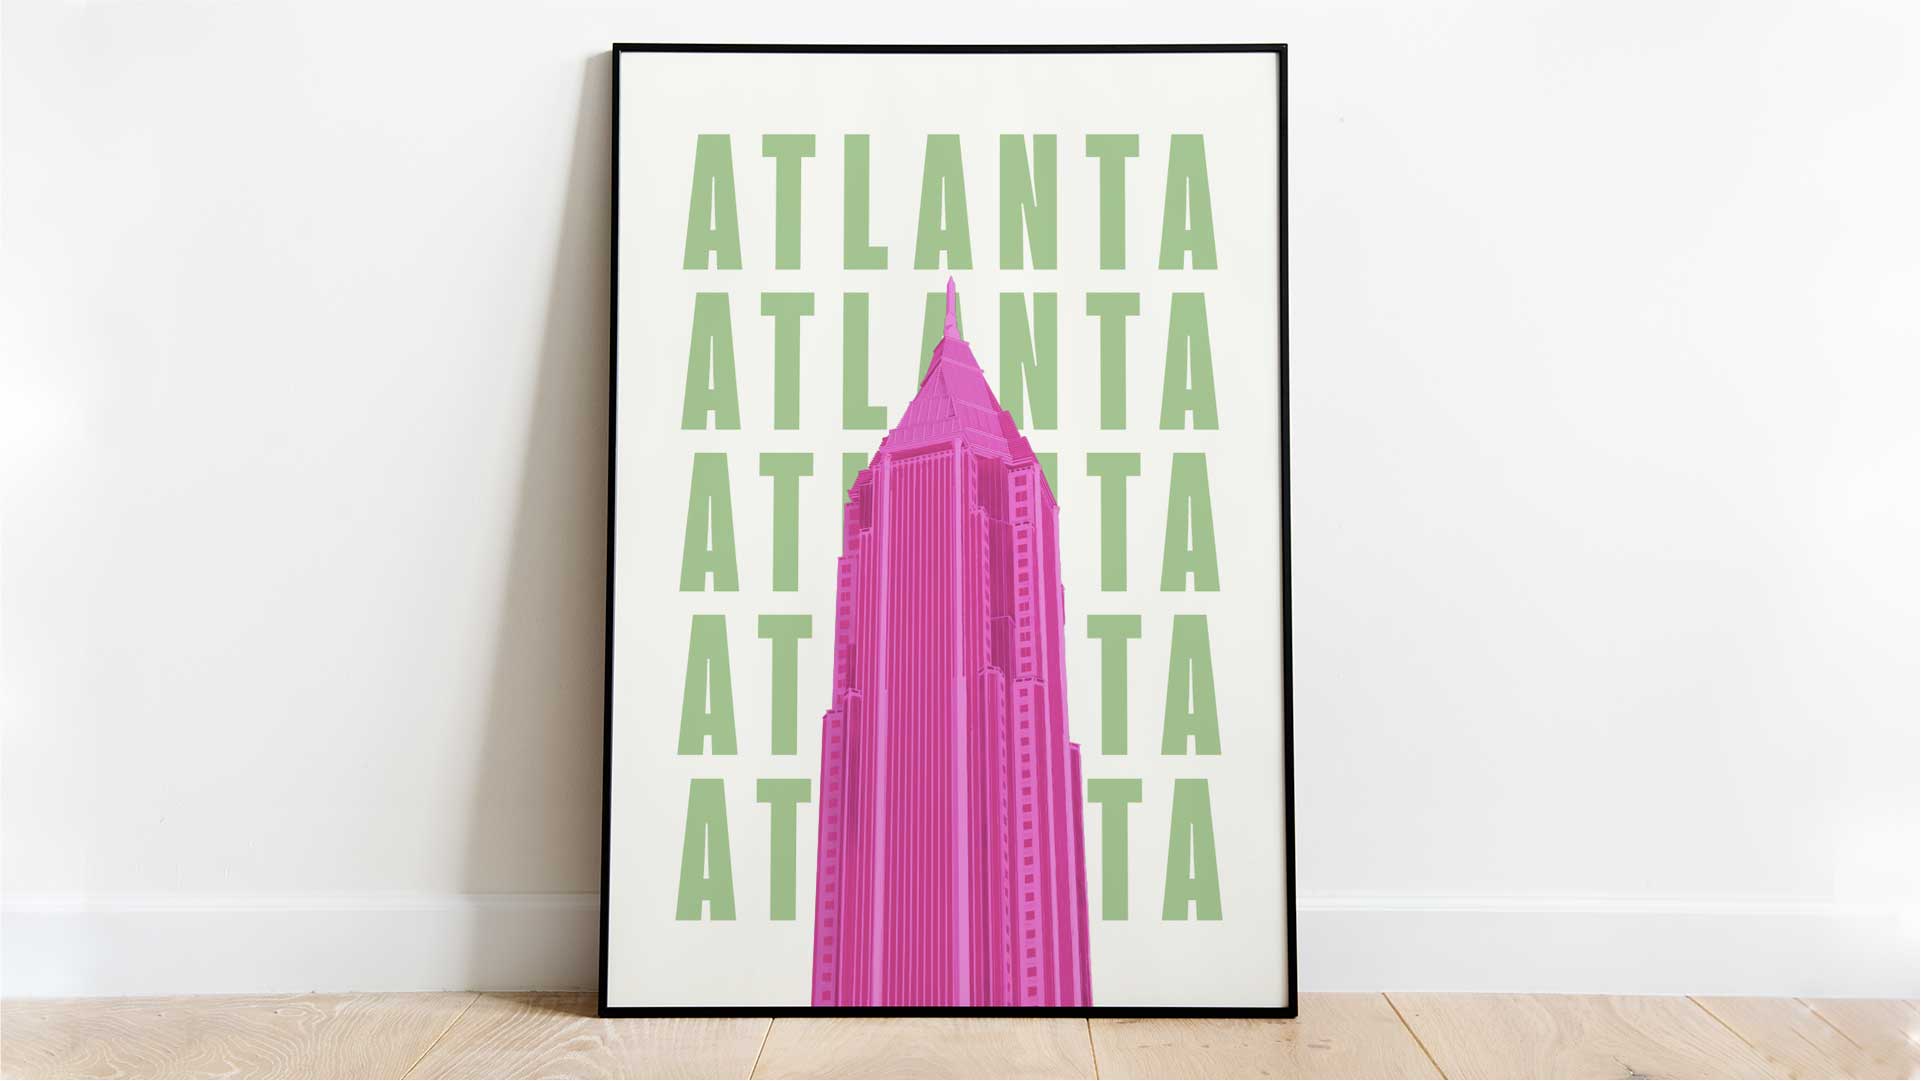 “Atlanta,” Poster Design / “Atlanta,” Poster Design, 11x17 inch print, 2021. This design aims to be a visual representation of the vibrant and diverse city of Atlanta. The end result is a striking poster that captures the energy and essence of Atlanta